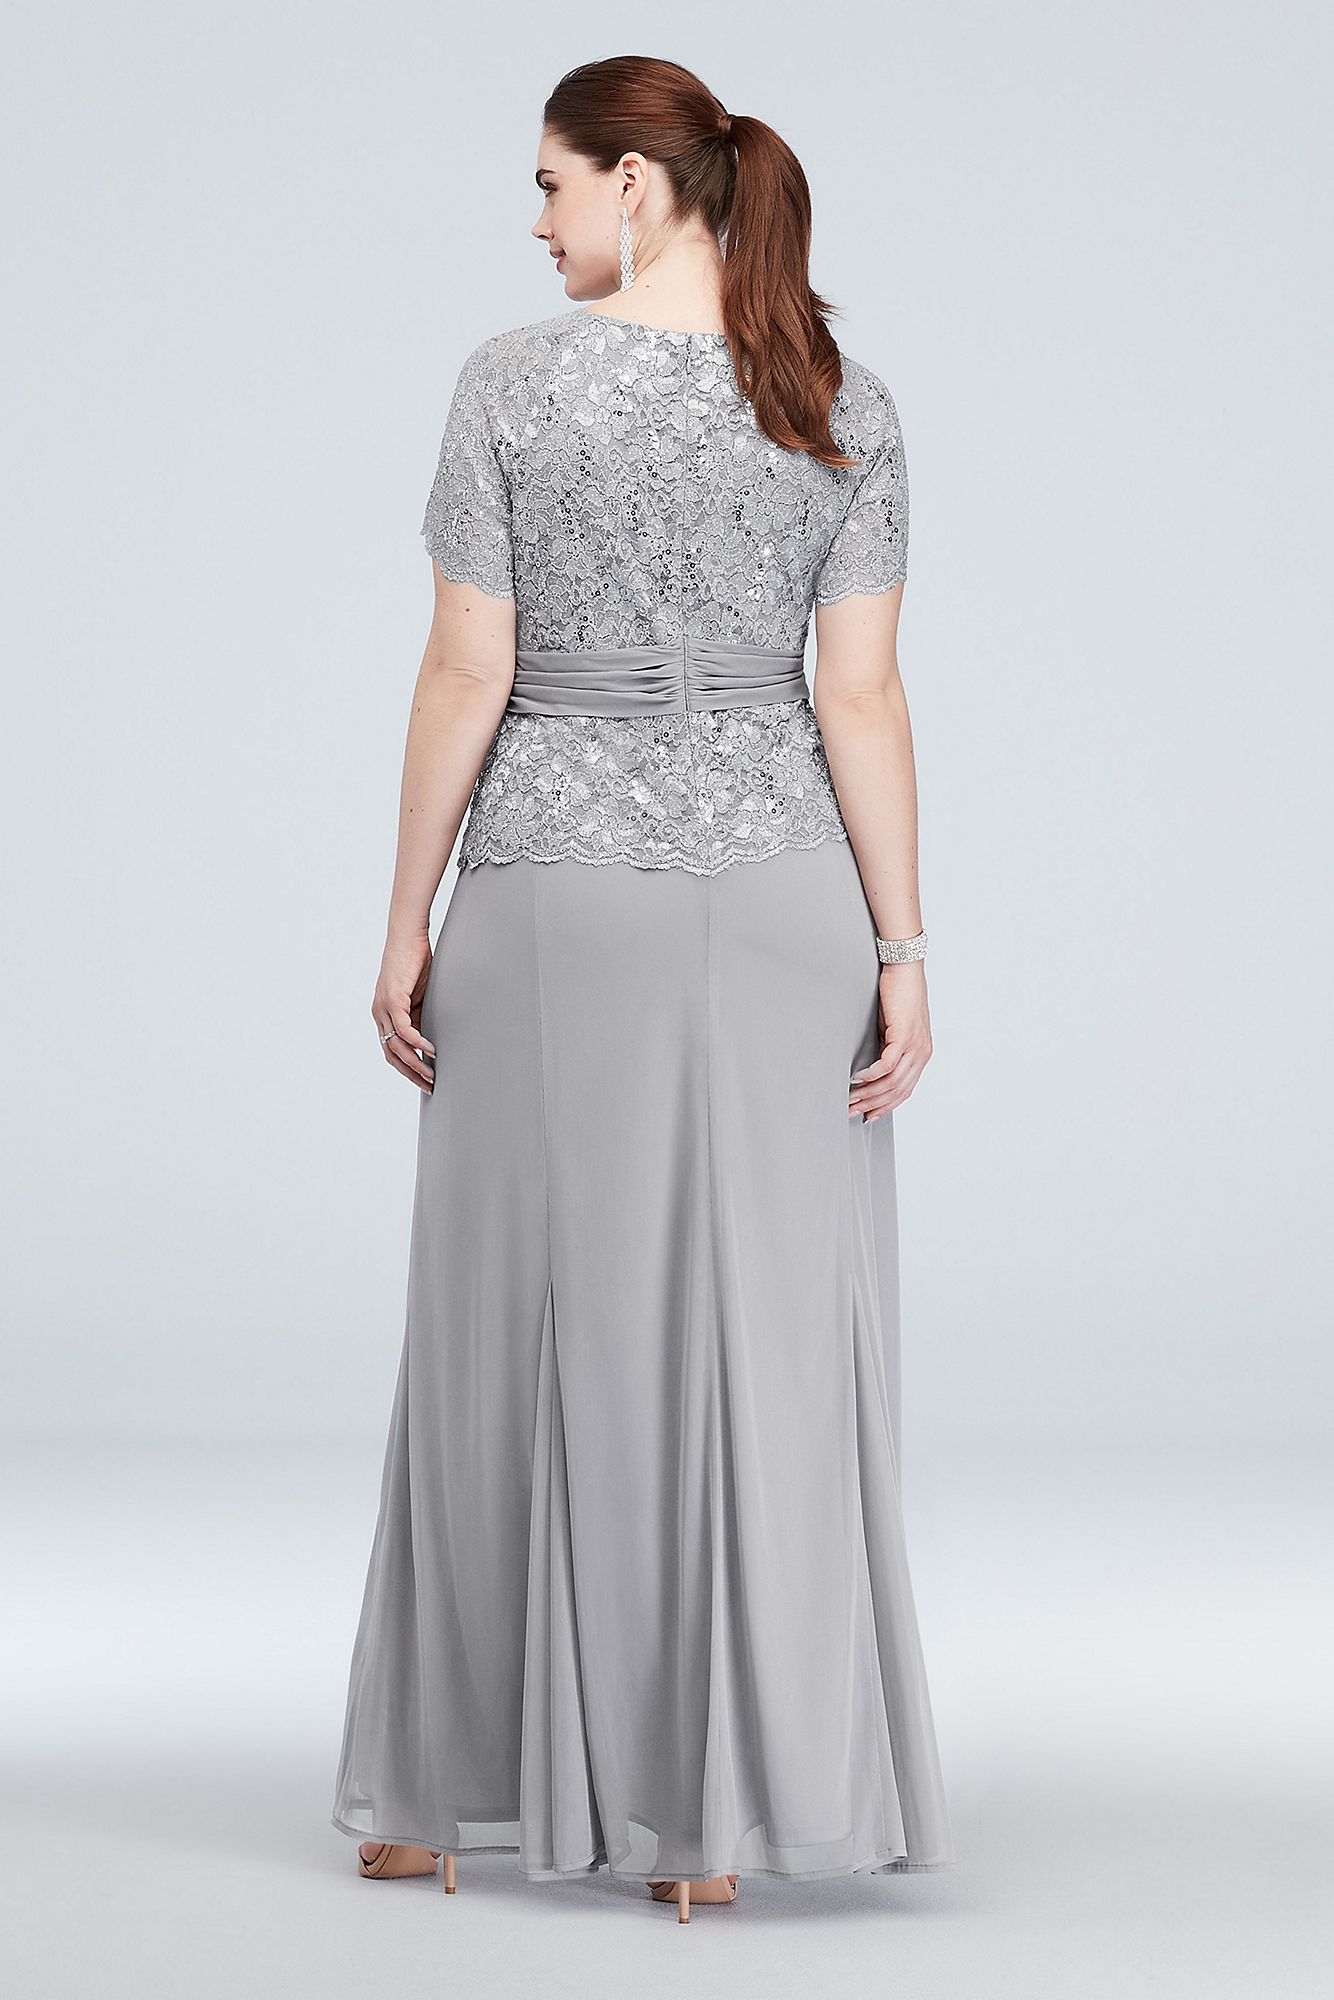 Short Sleeve Long Chiffon and Lace Mother of the Bride Dress 850223